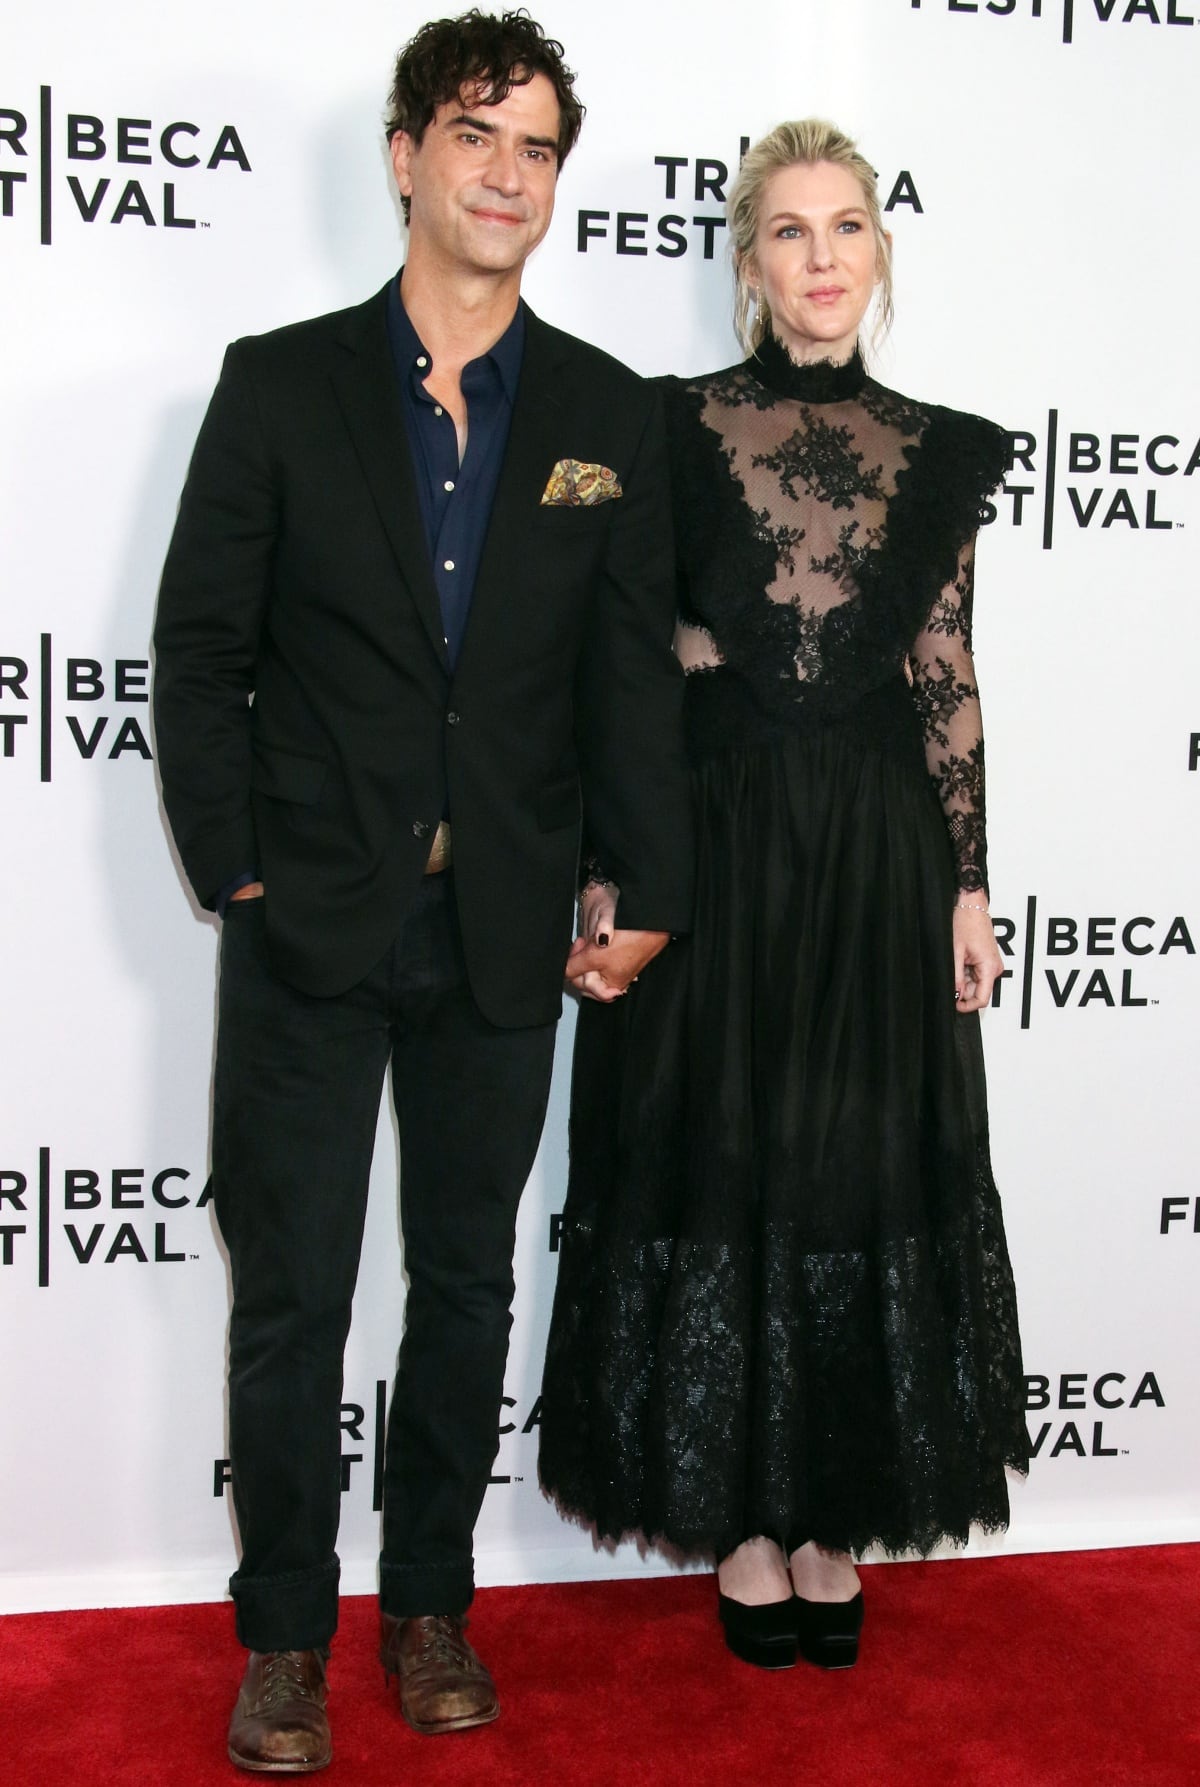 Hamish Linklater and Lily Rabe made quite the stunning pair at the world premiere of Downtown Owl during the Tribeca Festival